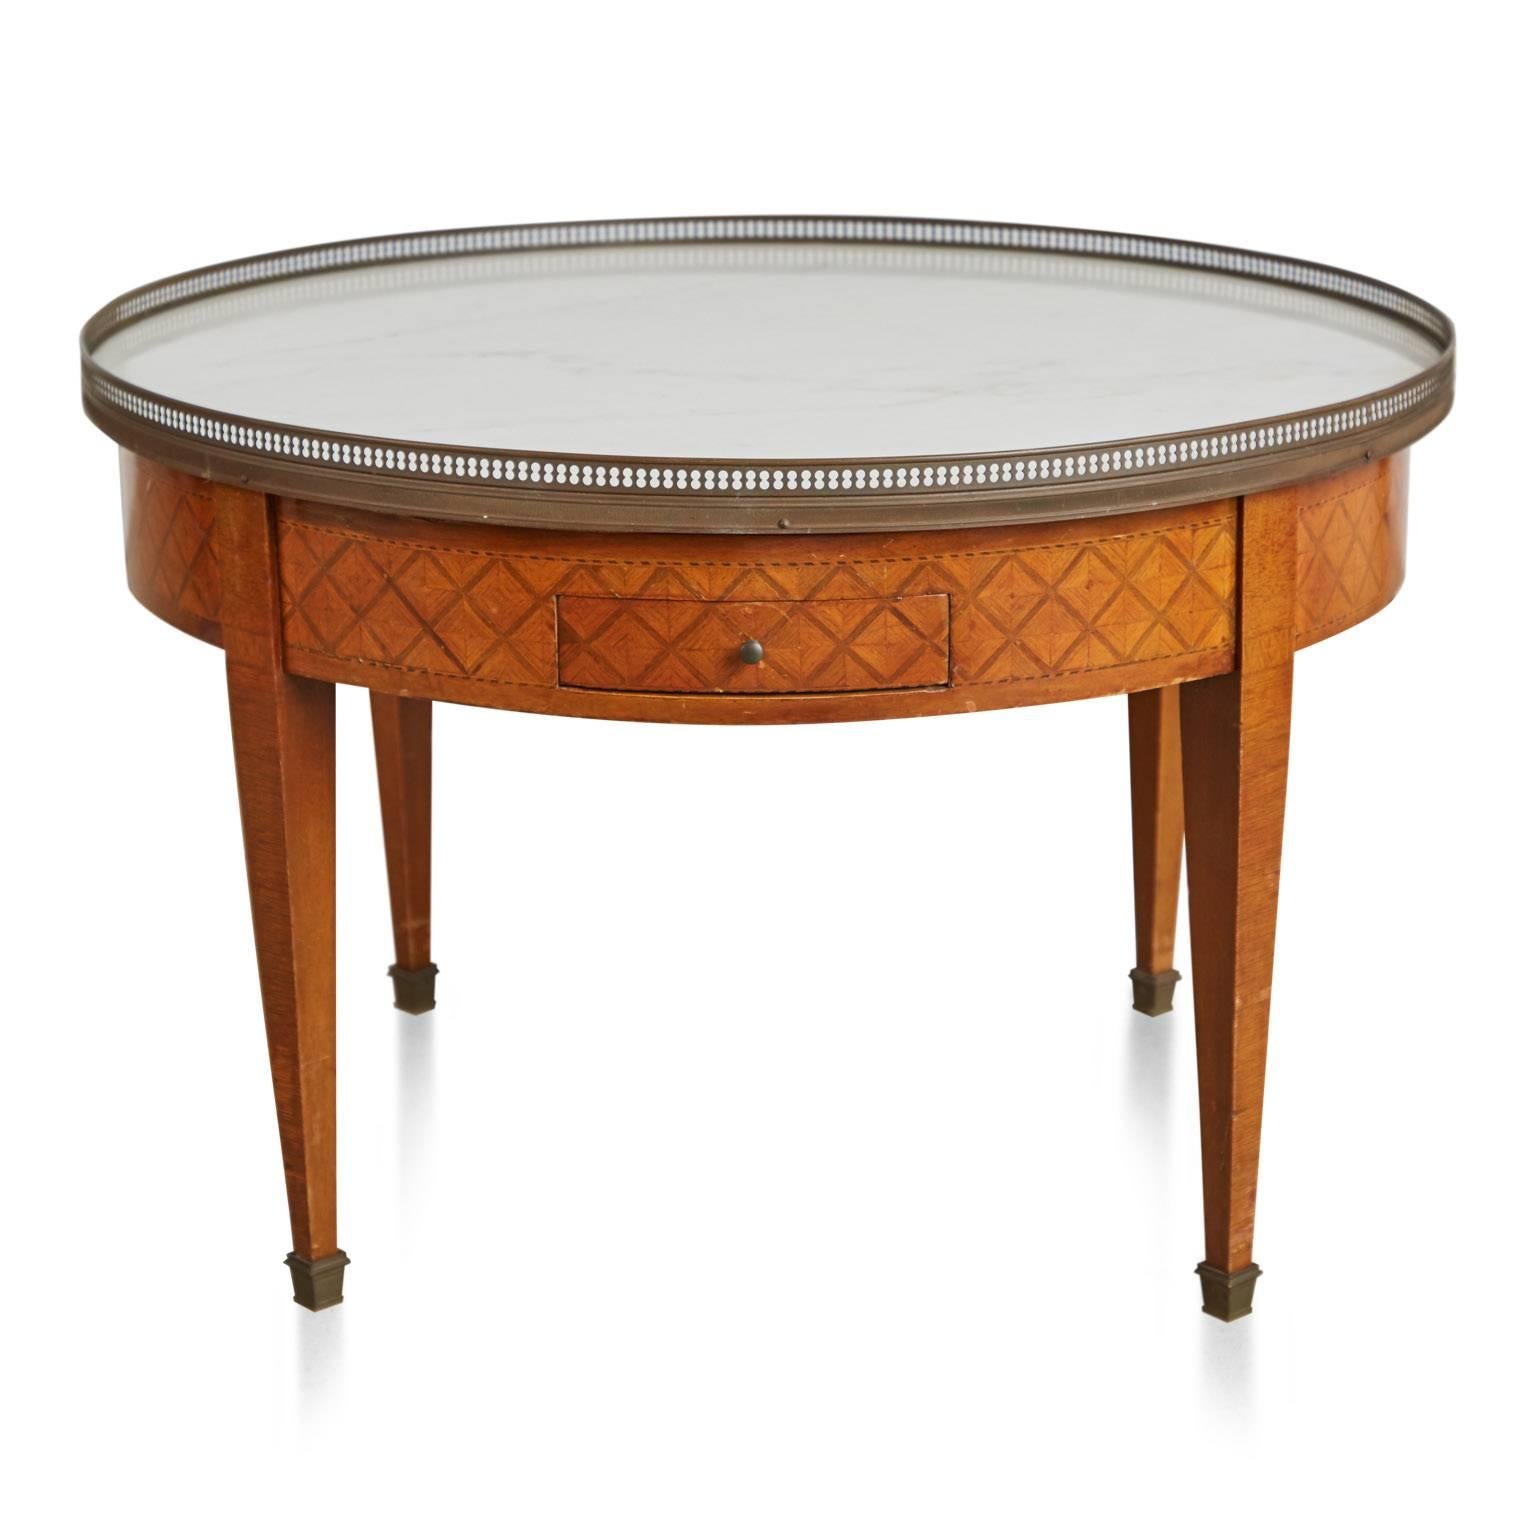 Neoclassical Revival French Parquet Bouillotte Table with Marble Top, circa 1940